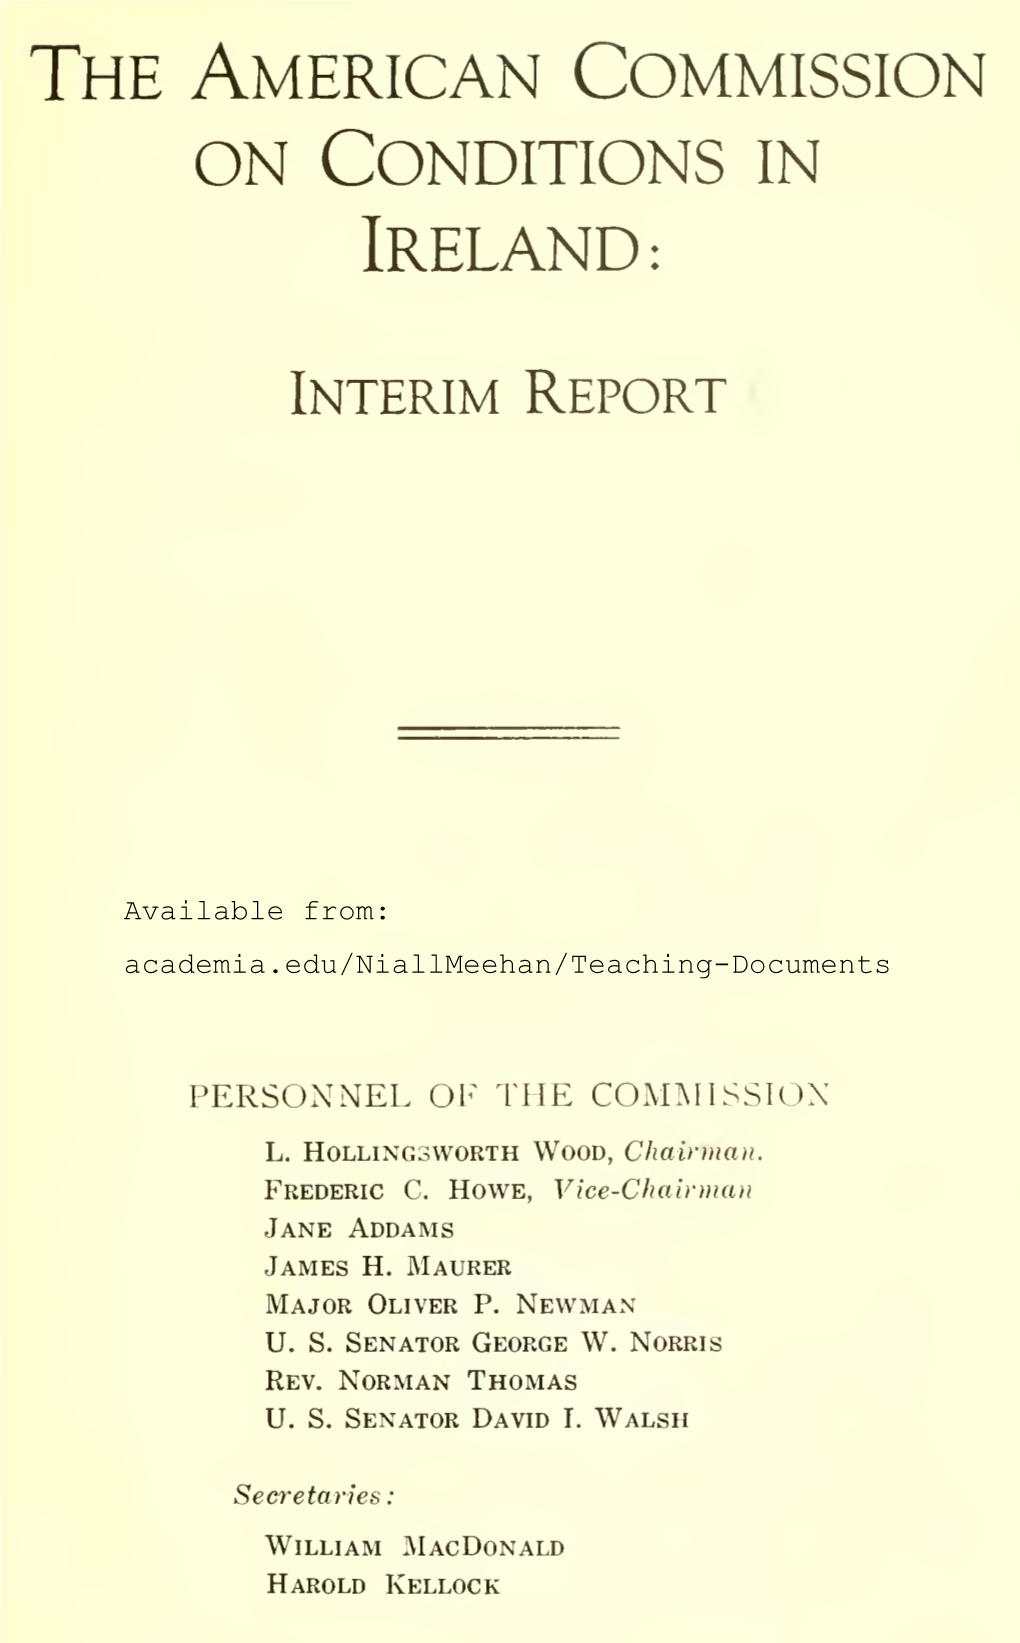 The American Commission on Conditions in Ireland, Interim Report